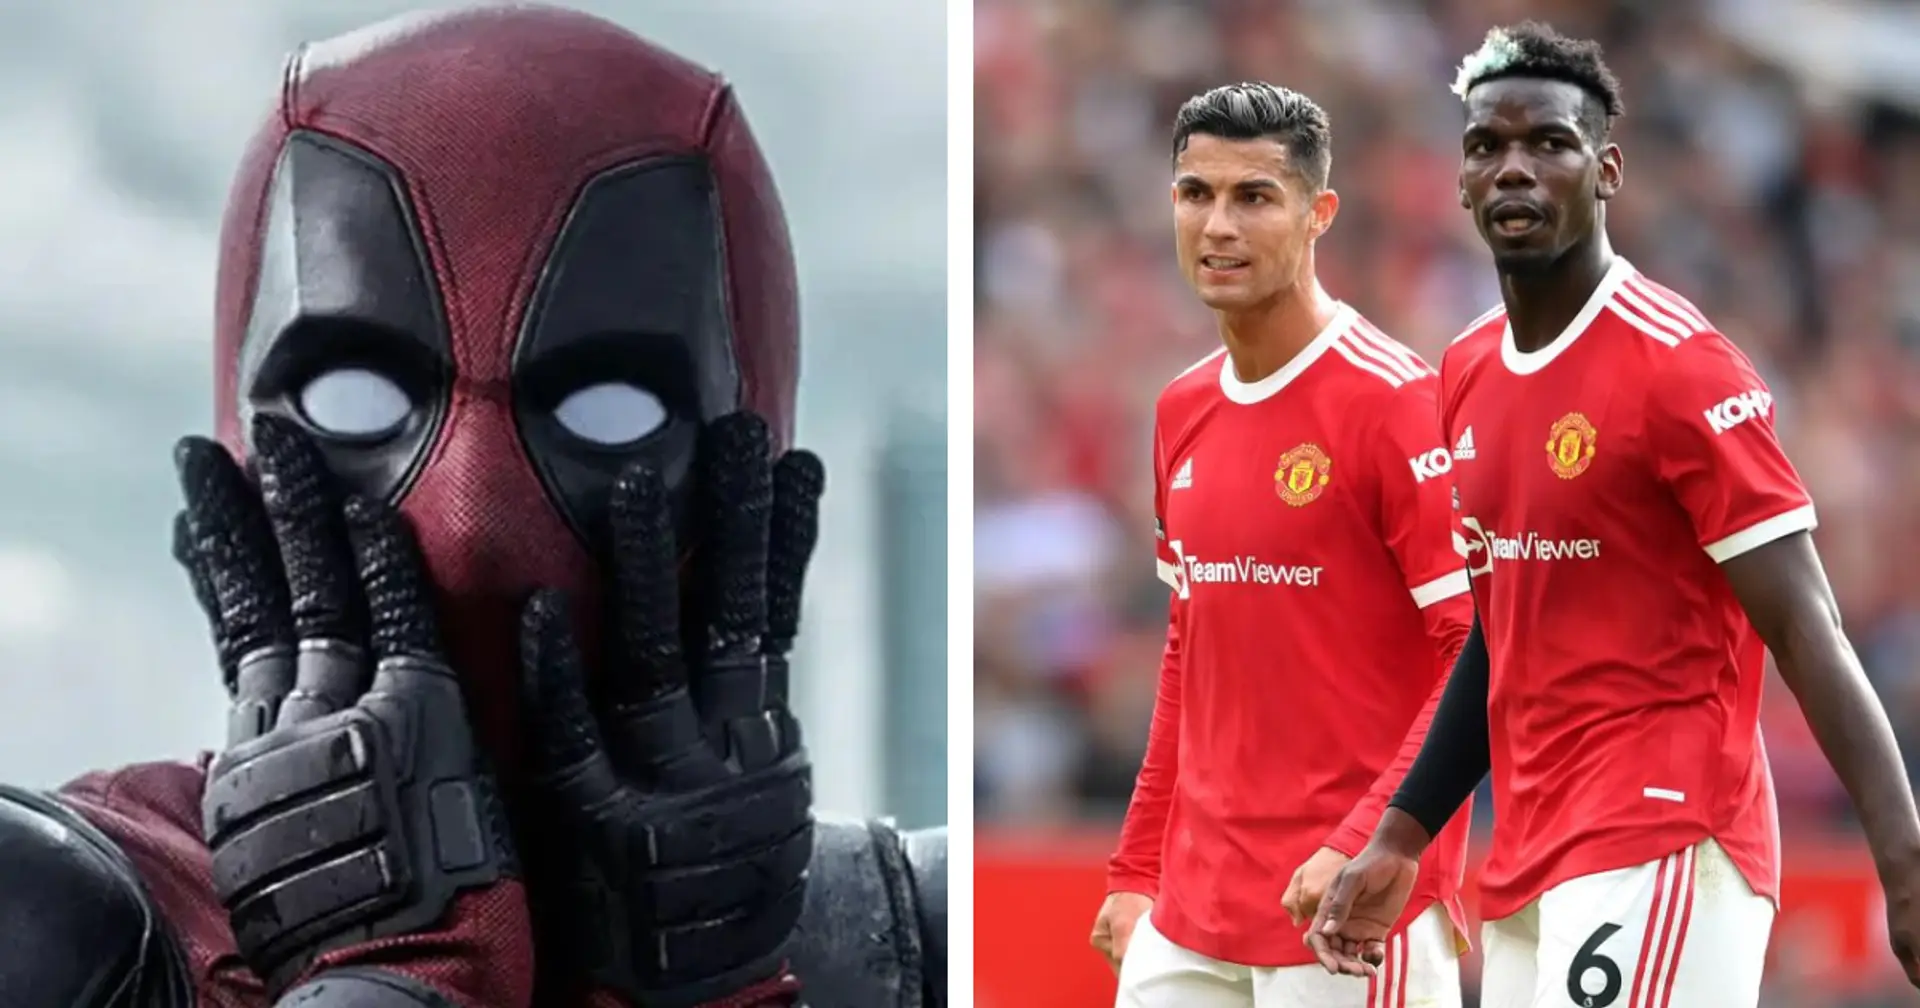 Hollywood star Ryan Reynolds responds to fan who asked him to 'buy Manchester United'